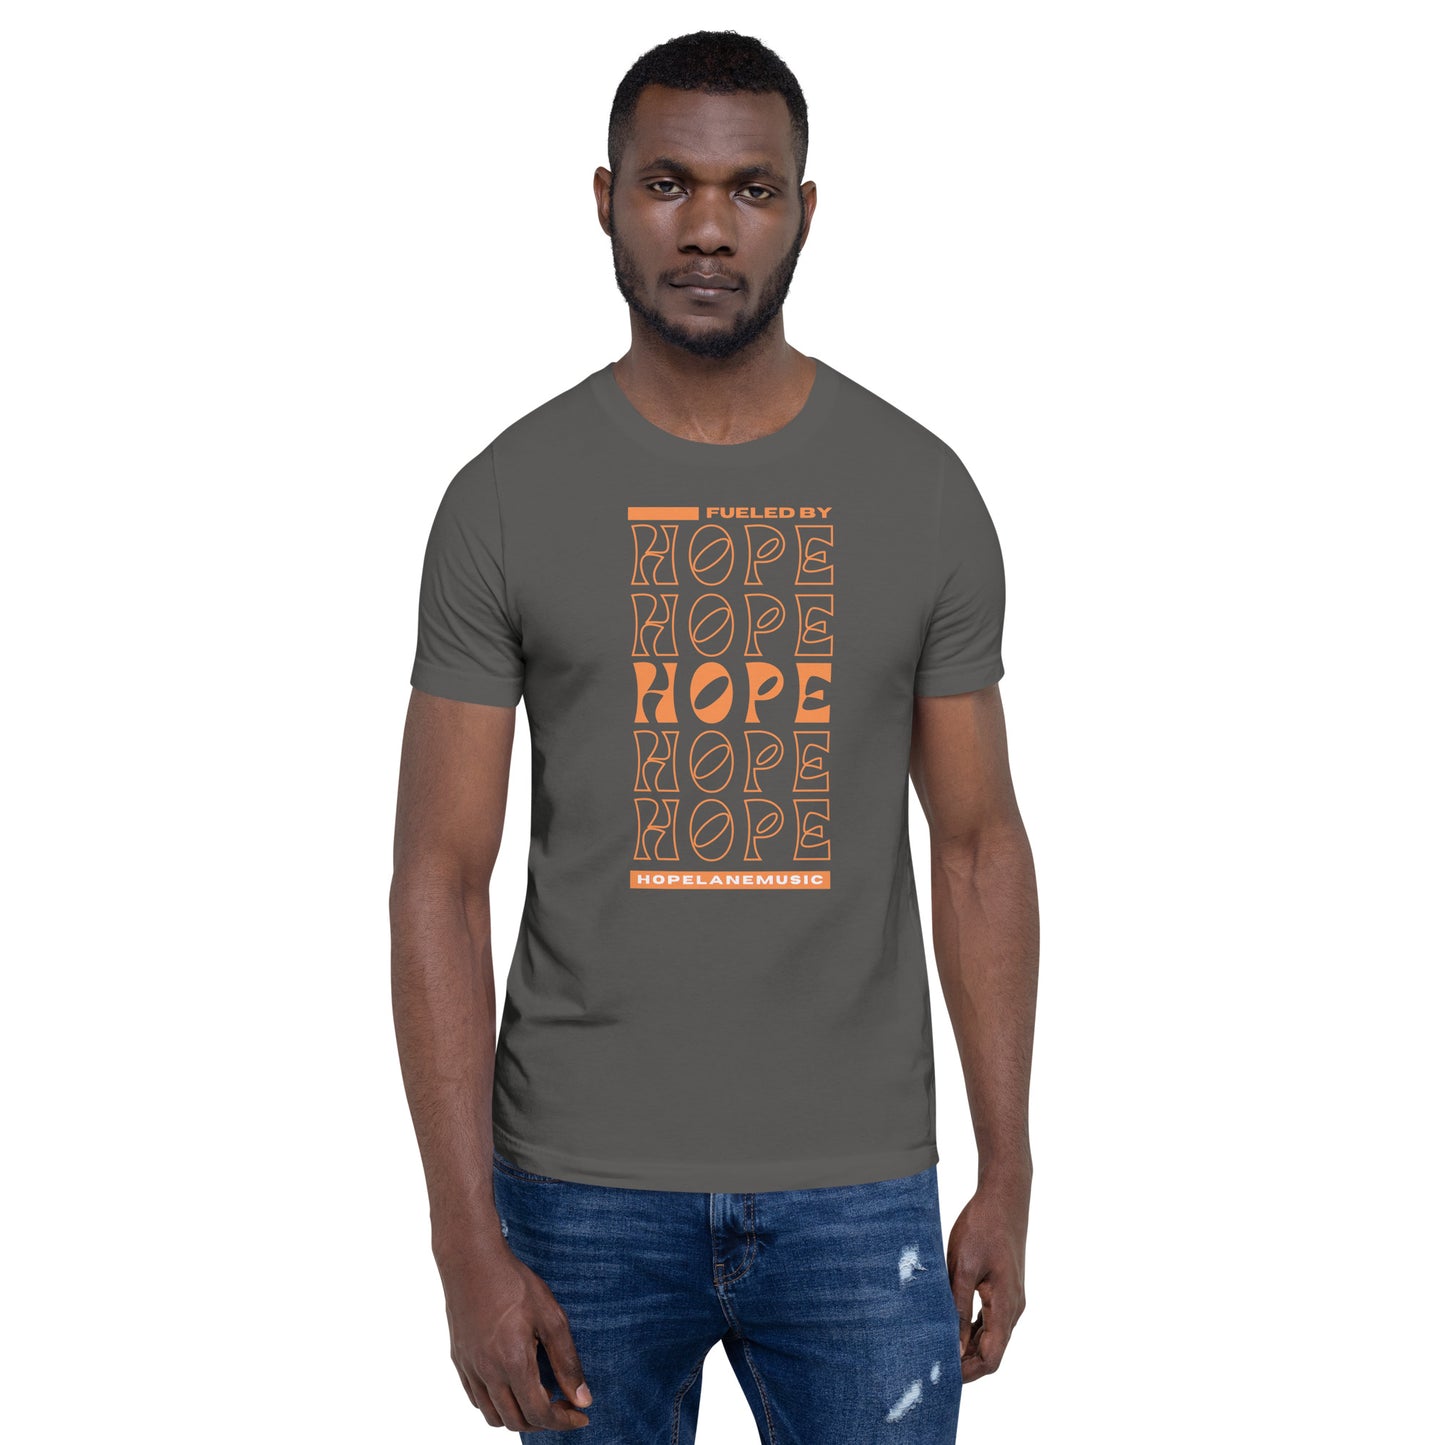 'Fueled by Hope' (retro edition) Unisex t-shirt (official Hope Lane merch)